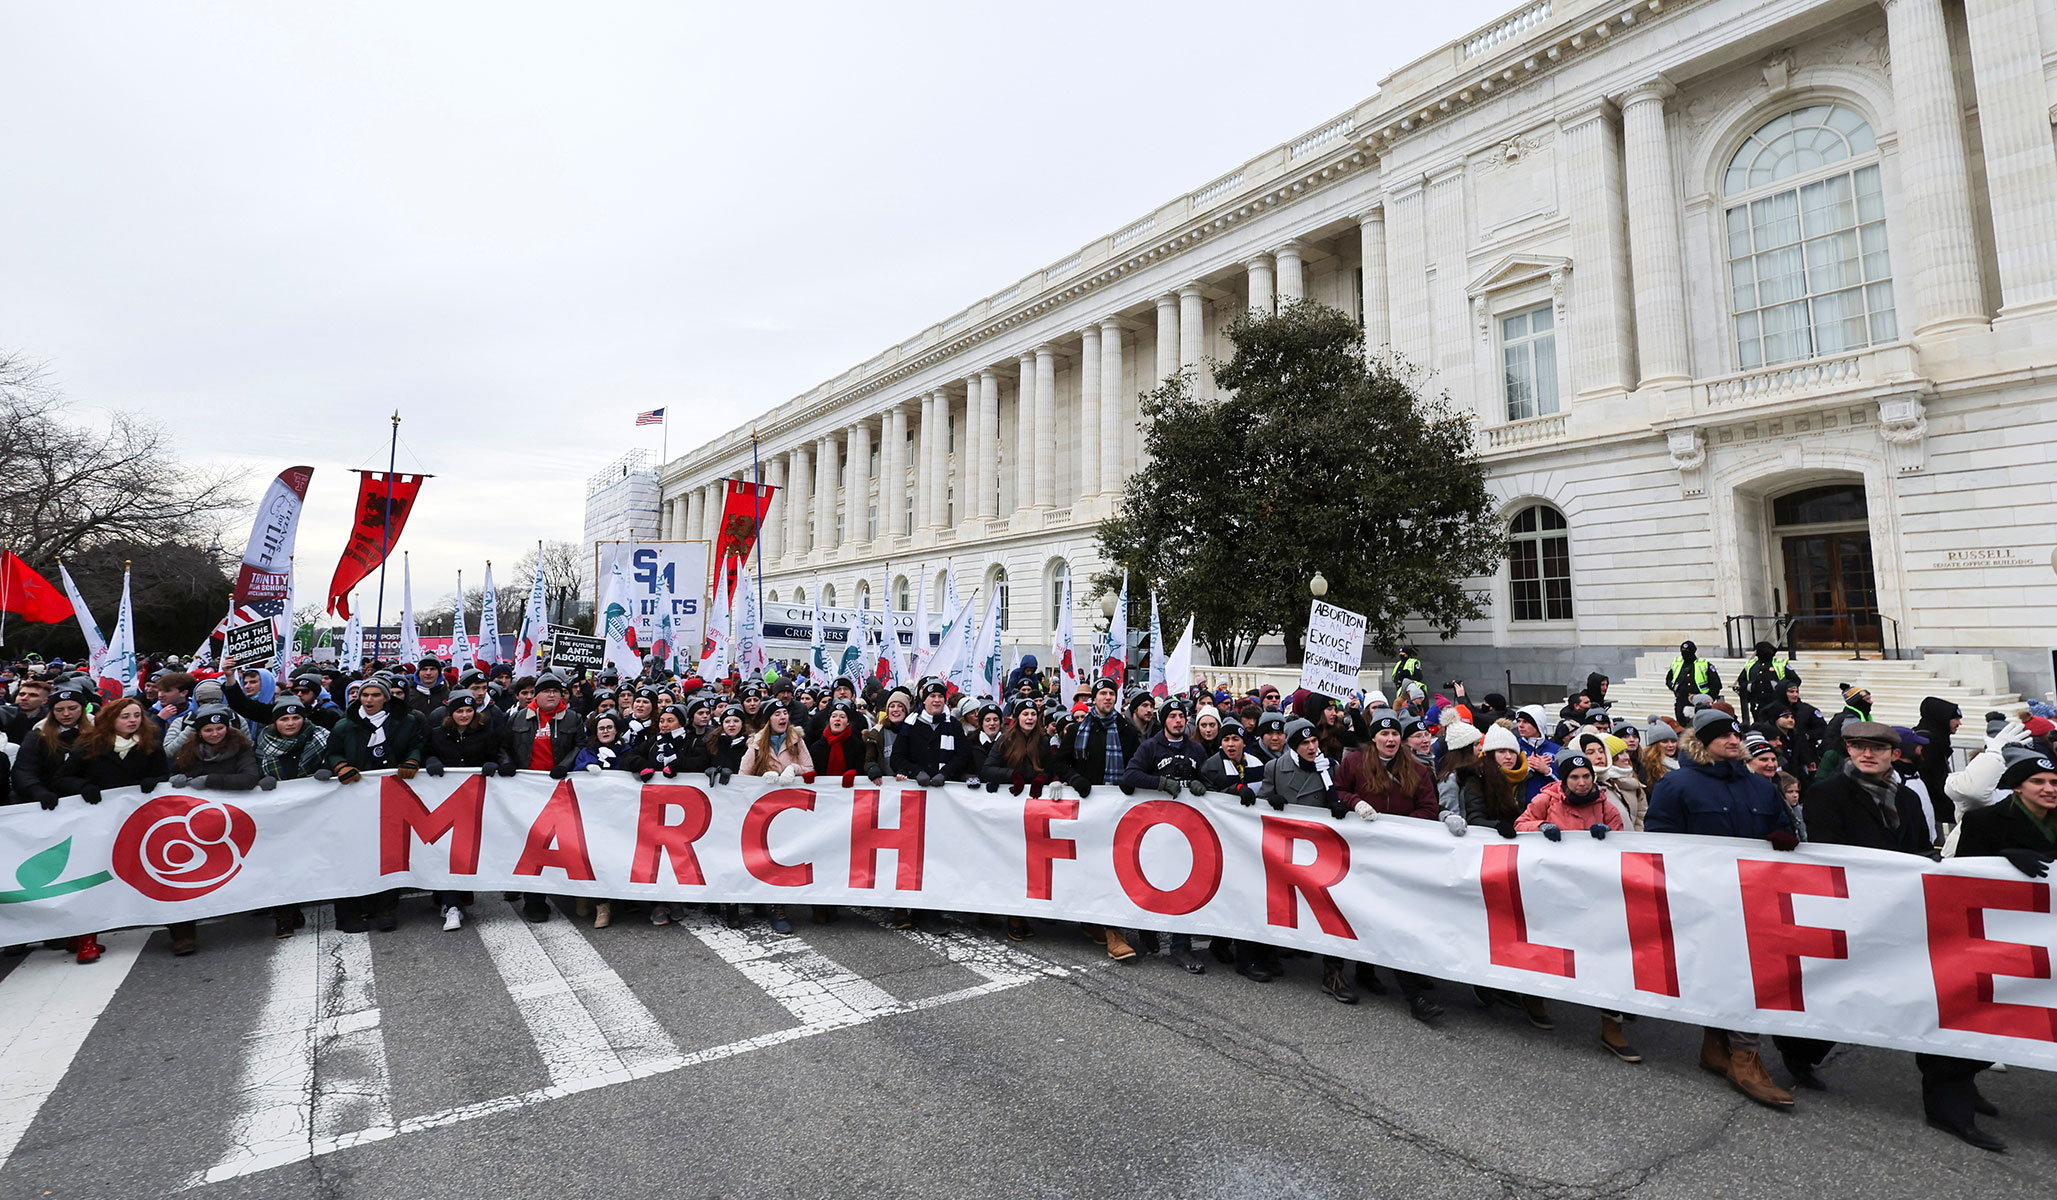 March for life 2022 11